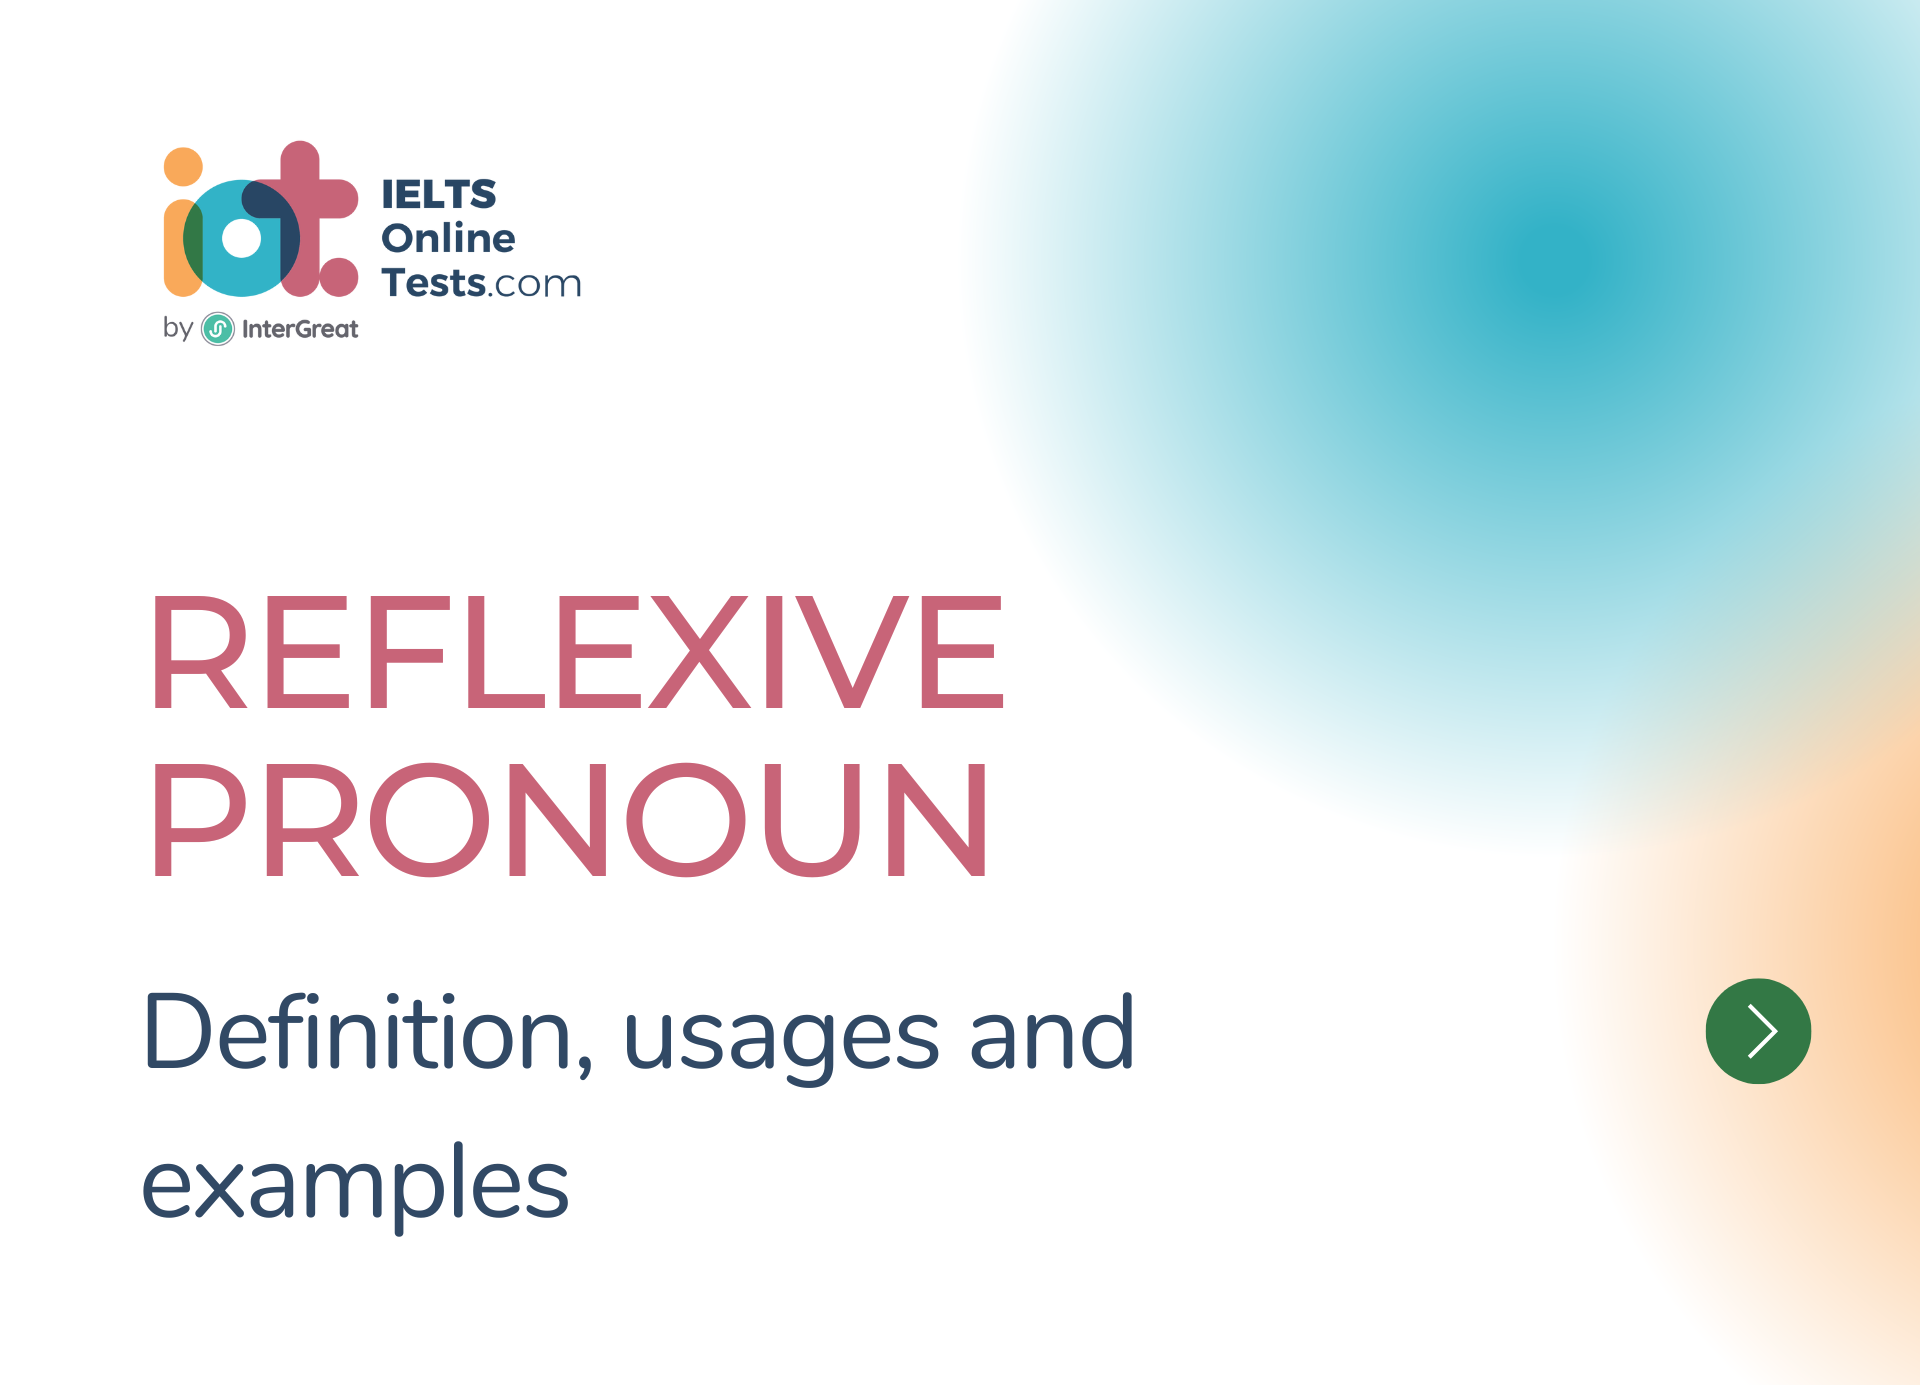 Reflexive pronoun definition and examples